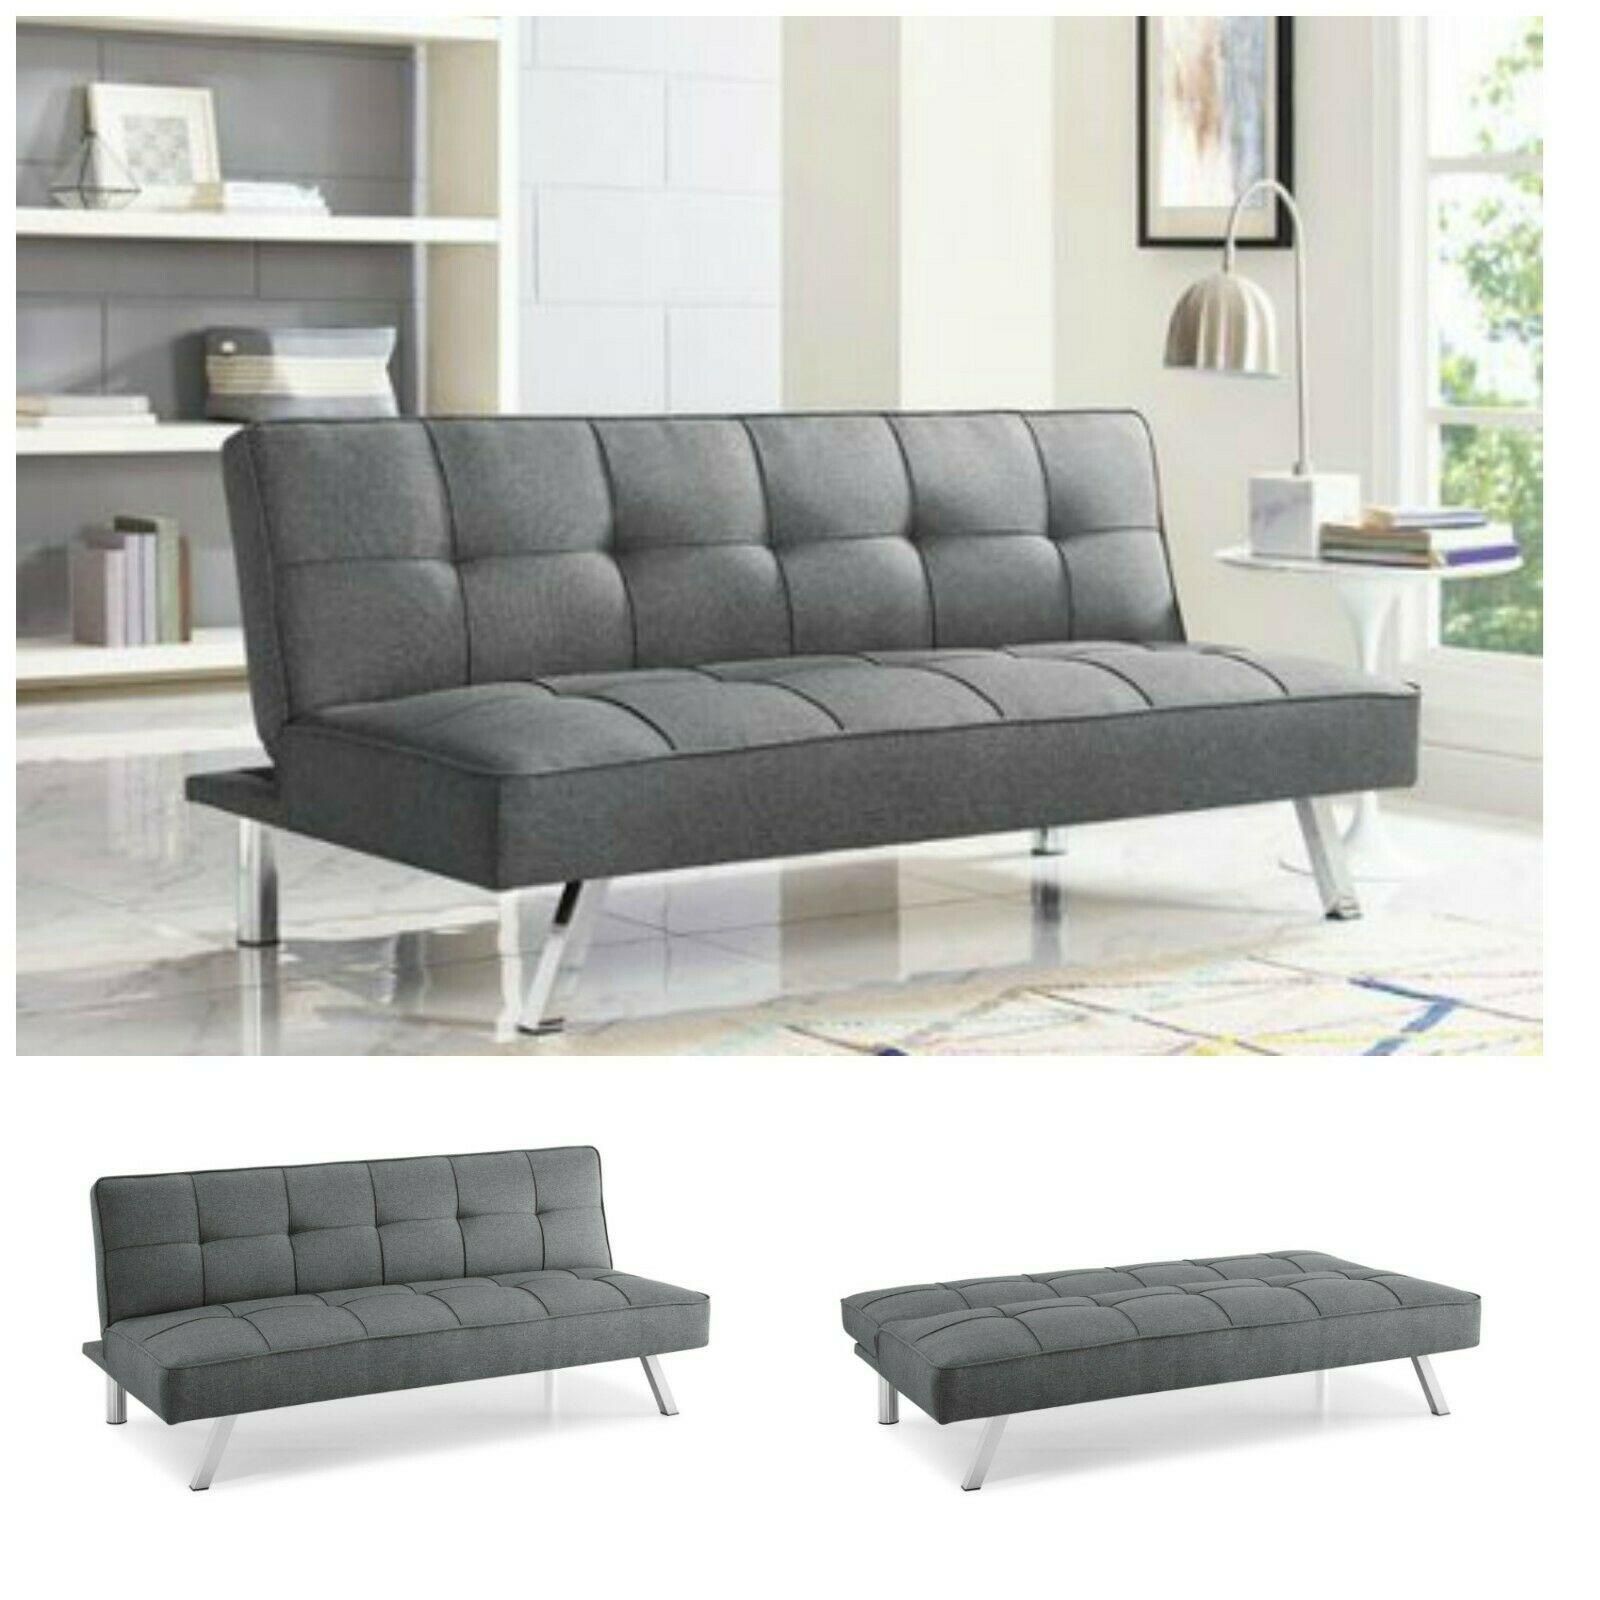 Sleeper Sofa Bed Grey Gray Convertible Couch Modern Intended For Well Known Convertible Gray Loveseat Sleepers (View 11 of 15)